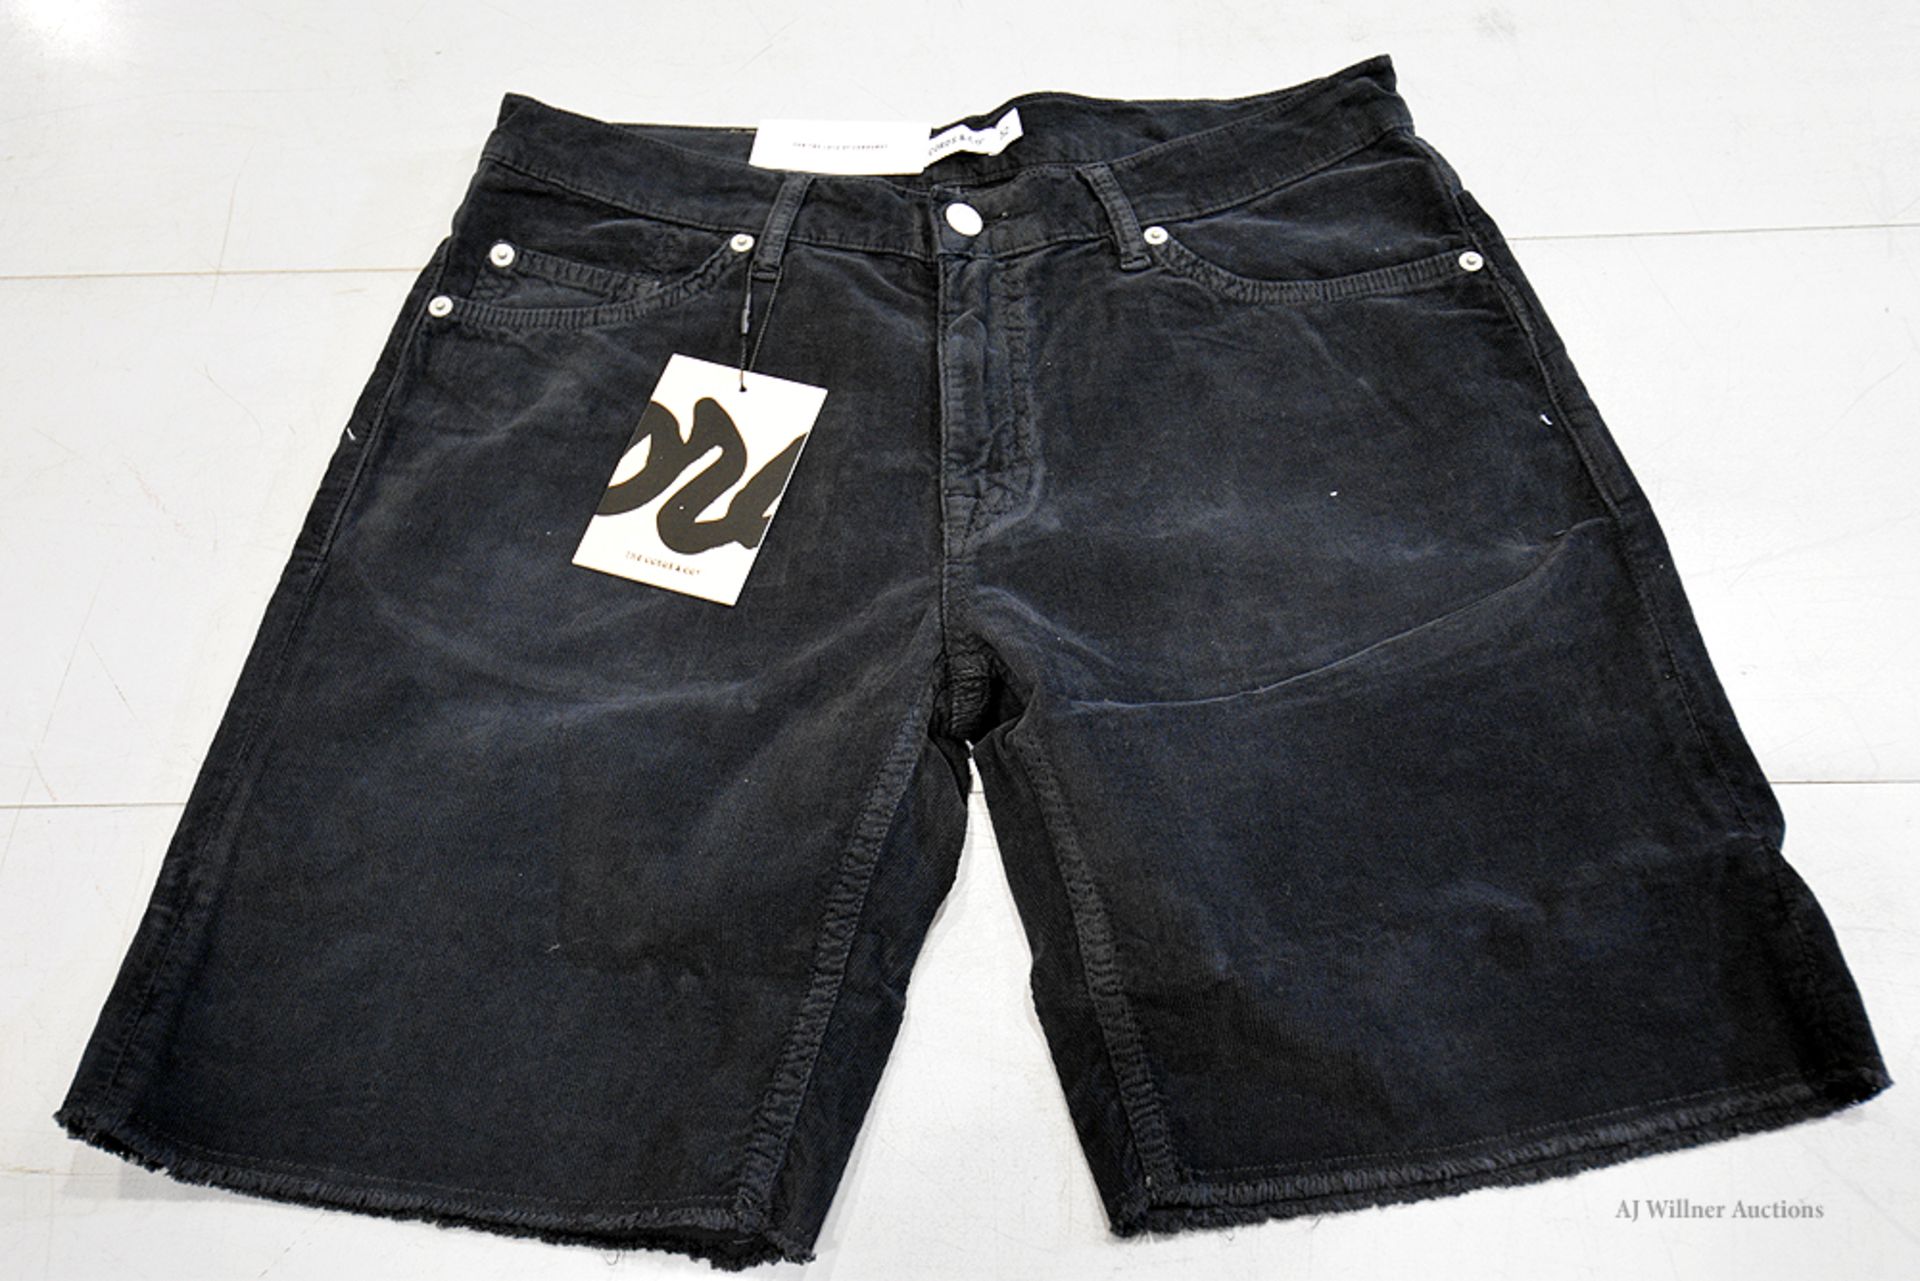 The Cords & Co. "Adam" Men's/ Mid-Waist/ Classic Fit/ Shorts MSRP $100 - Image 2 of 5